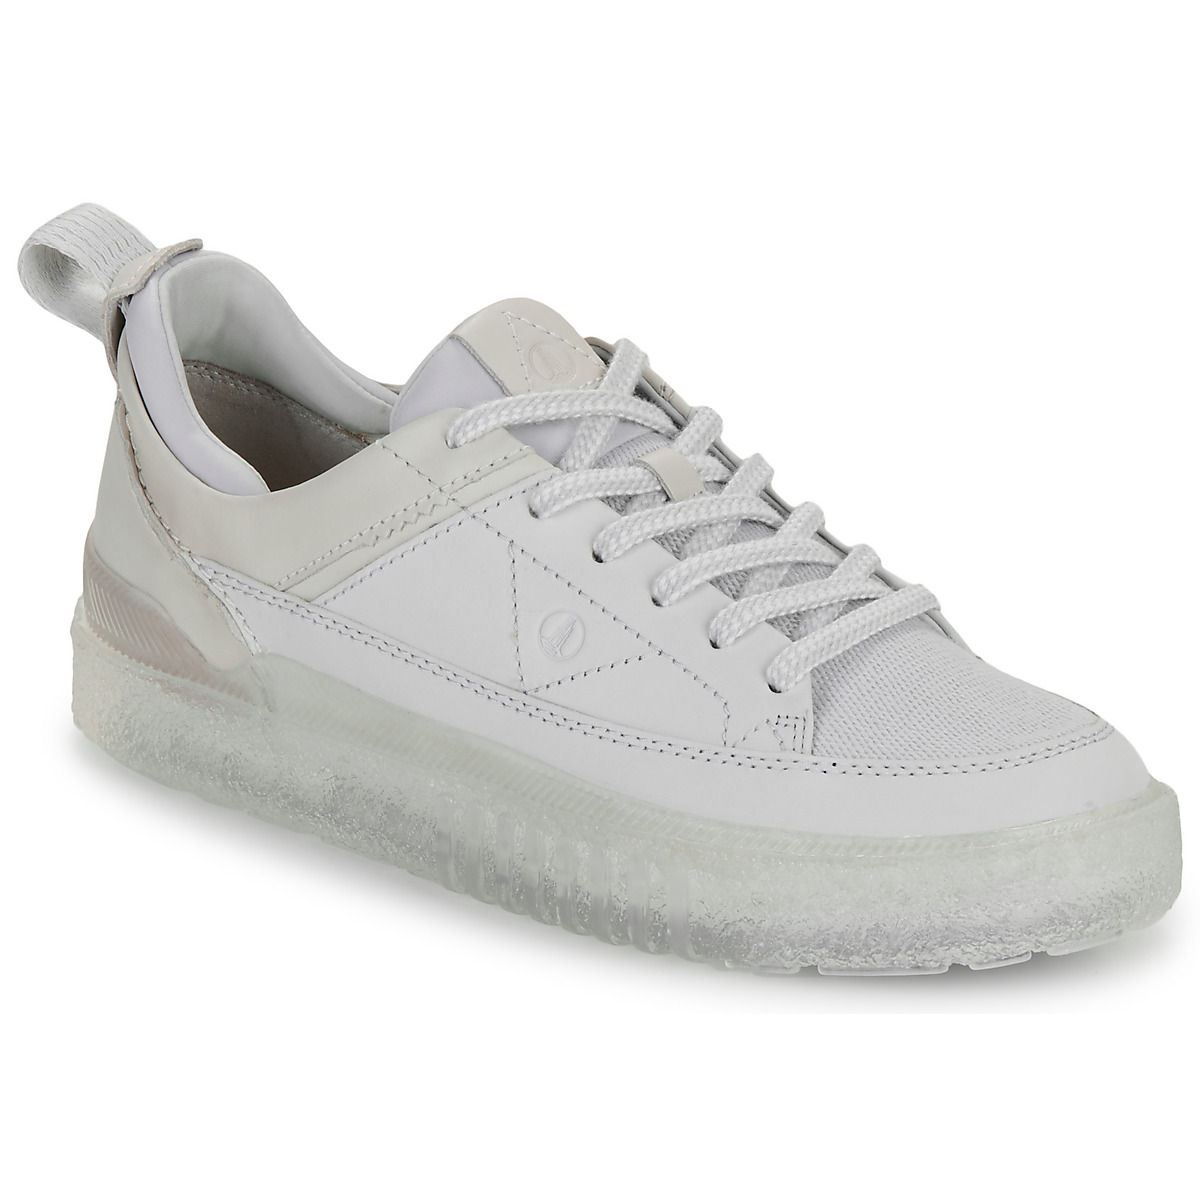 Clarks  Xαμηλά Sneakers Clarks SOMERSET LACE